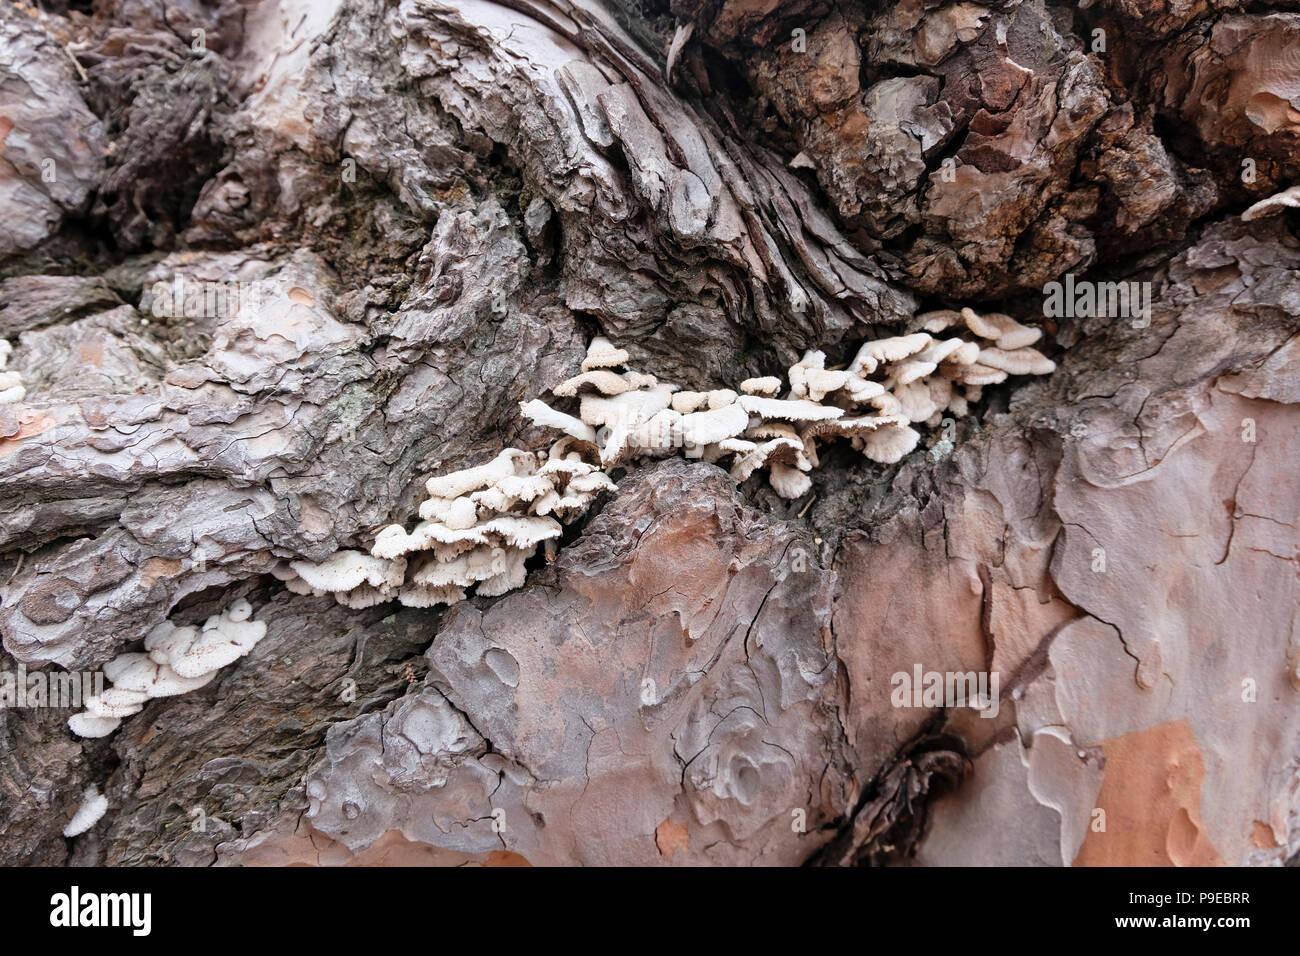 Tiny white fungi growing in crevice of old tree bark Stock Photo